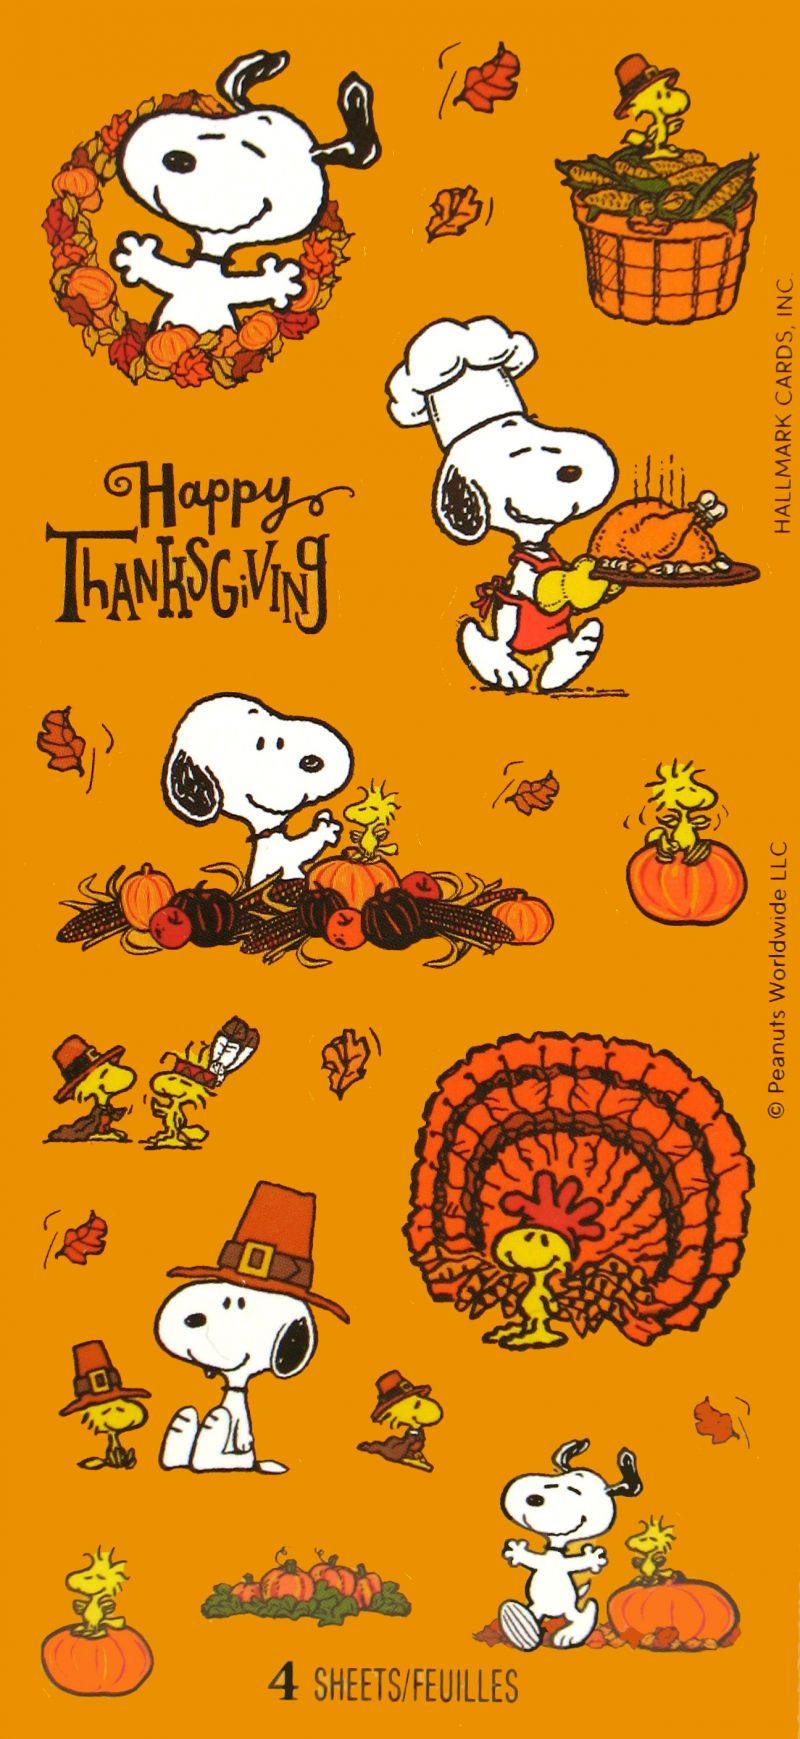 Peanuts Thanksgiving Wallpapers Group 45